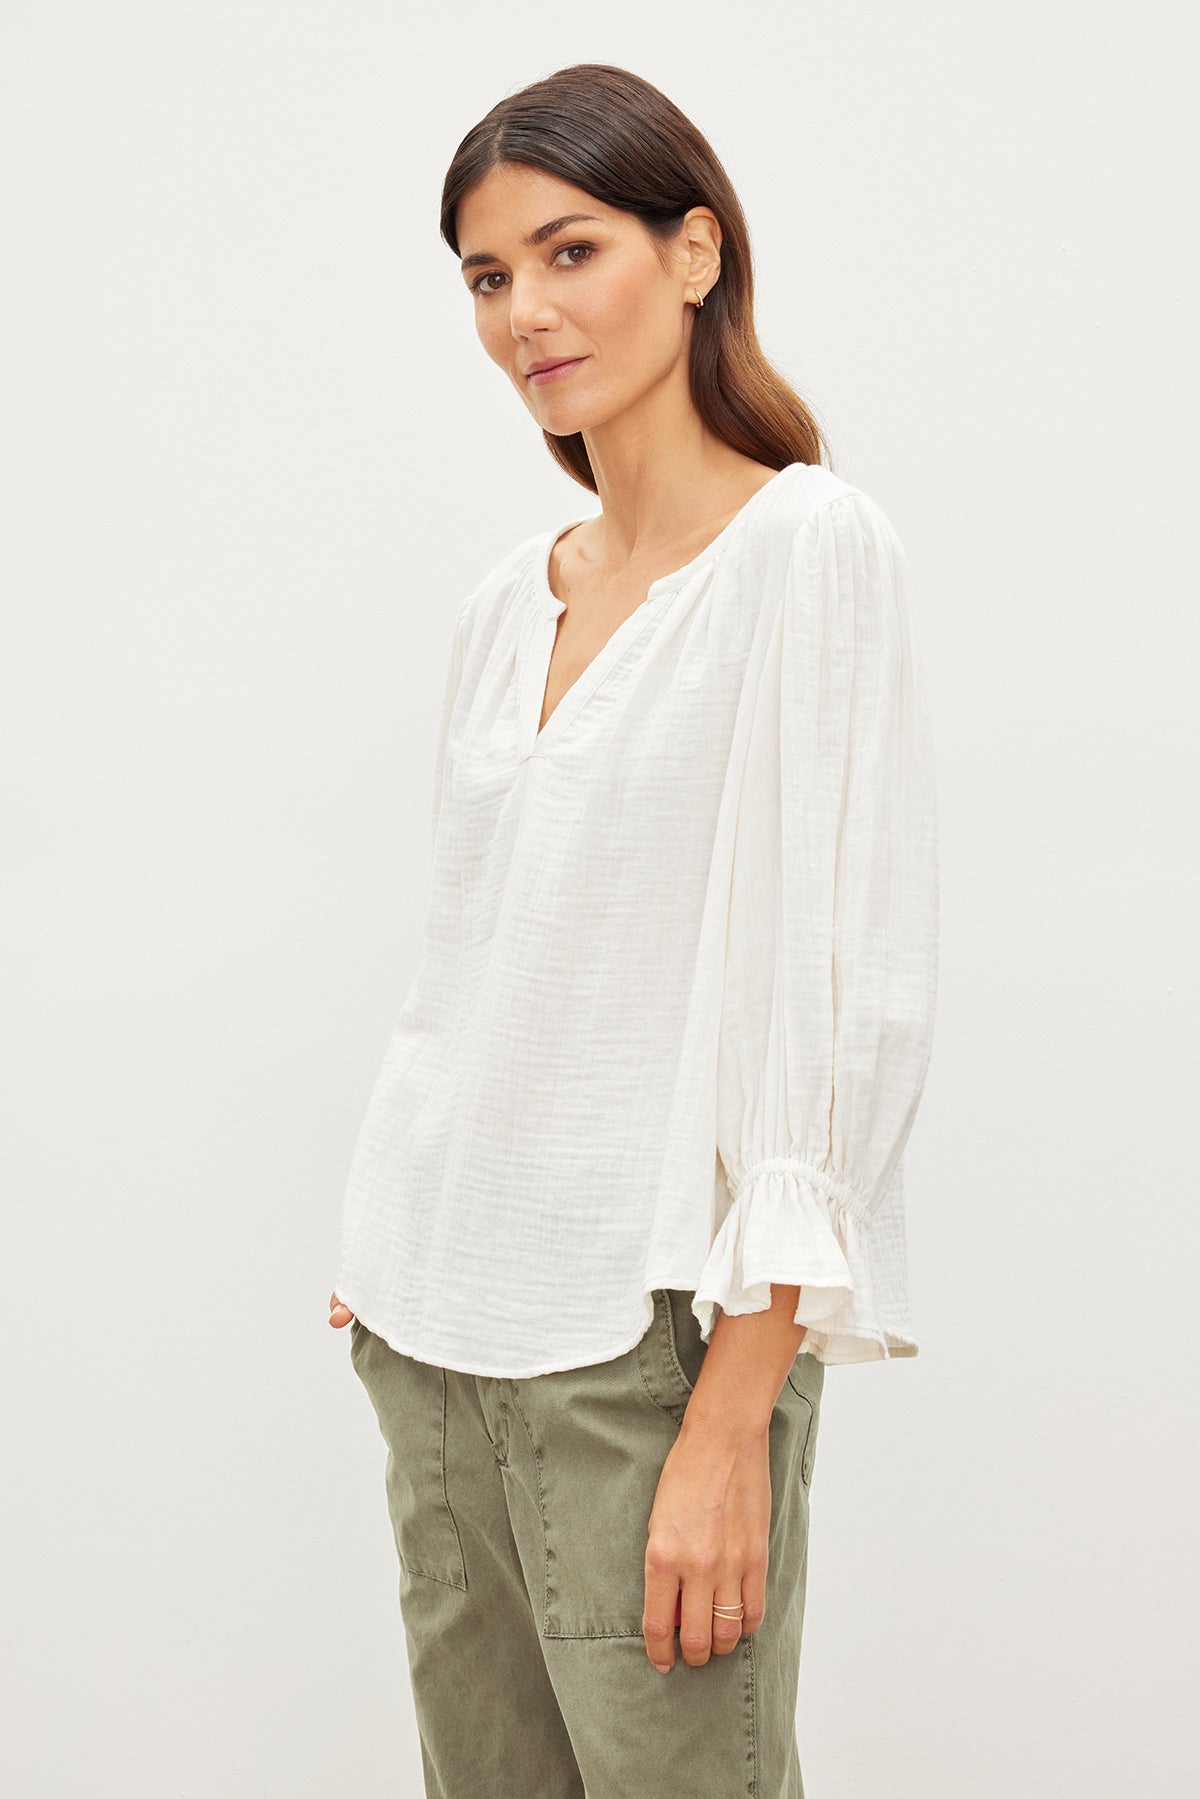   The model is effortlessly showcasing a relaxed fit in a Velvet by Graham & Spencer MILLY COTTON GAUZE PEASANT TOP, paired with stylish green pants. 